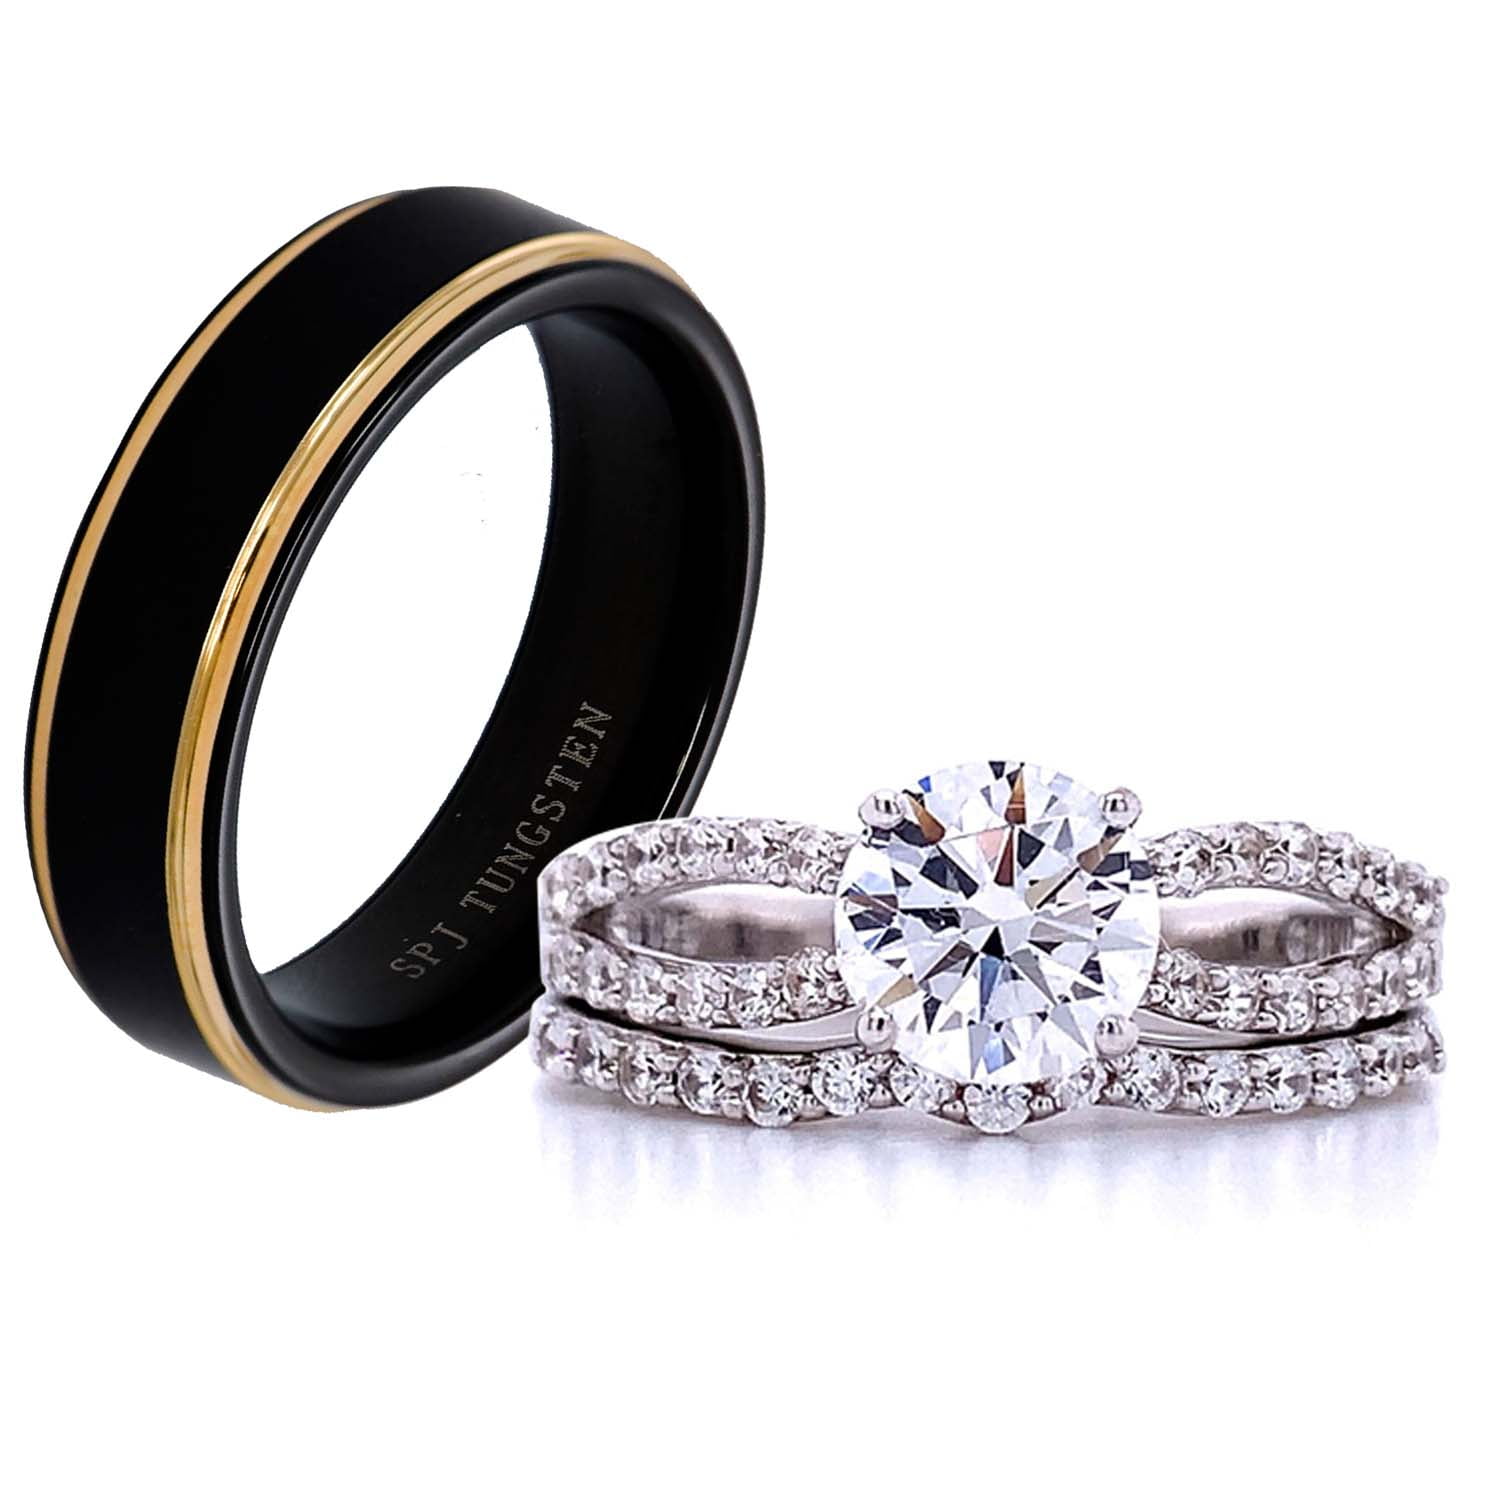 FlameReflection Black Stainless Steel Marquise Cubic Zirconia Wedding Ring Set Women Size 5-11 SPJ 